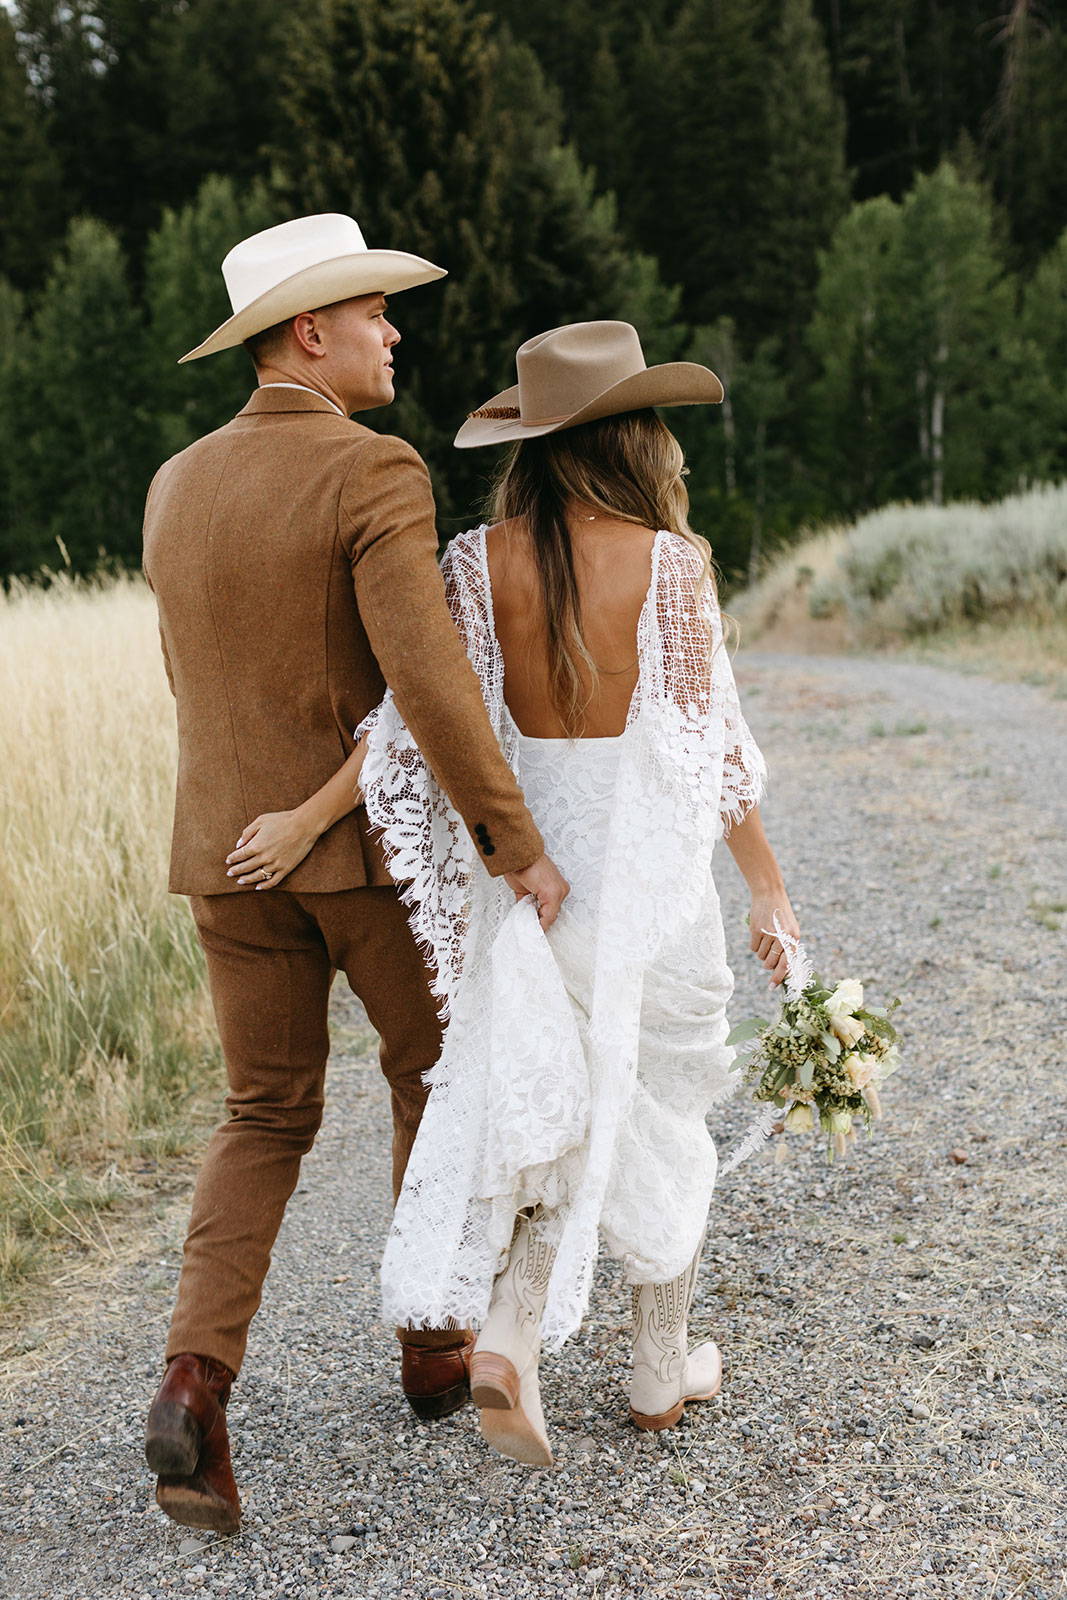 Bride and Groom in country hats